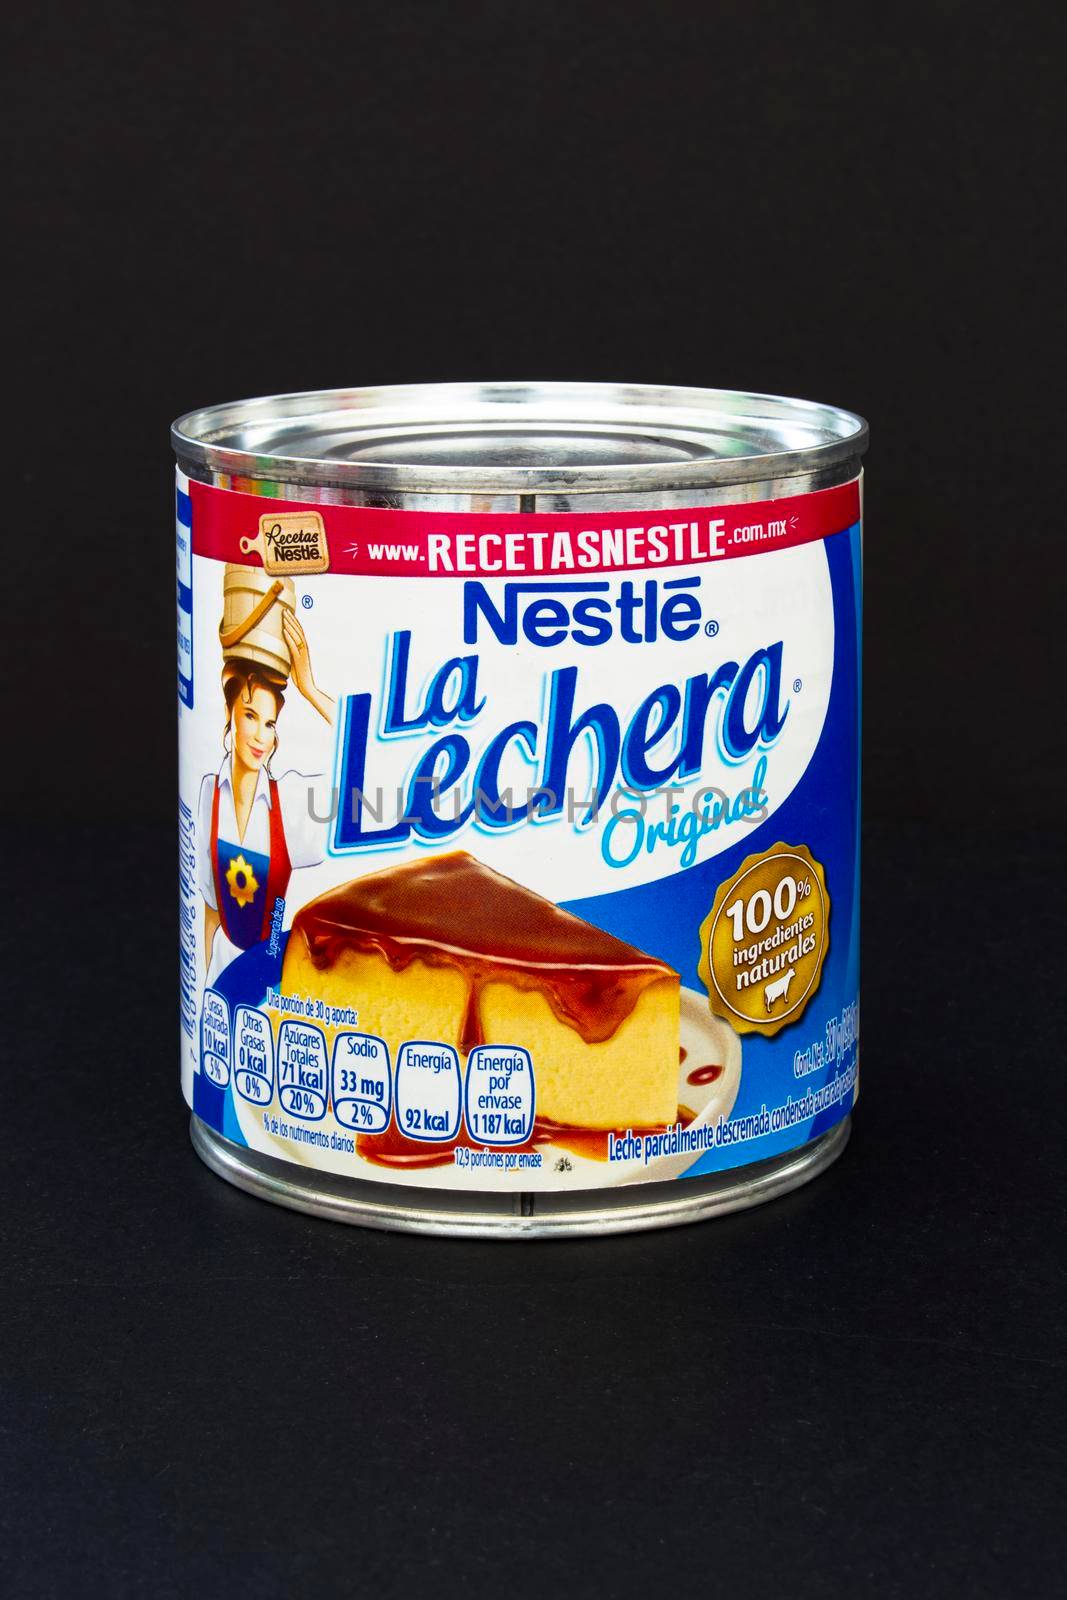 Calgary, Alberta, Canada. April 14, 2021. La Lechera which means Milkmaid in Spanish, is a Nestlé brand, producing various dairy products. Sweetened condensed milk